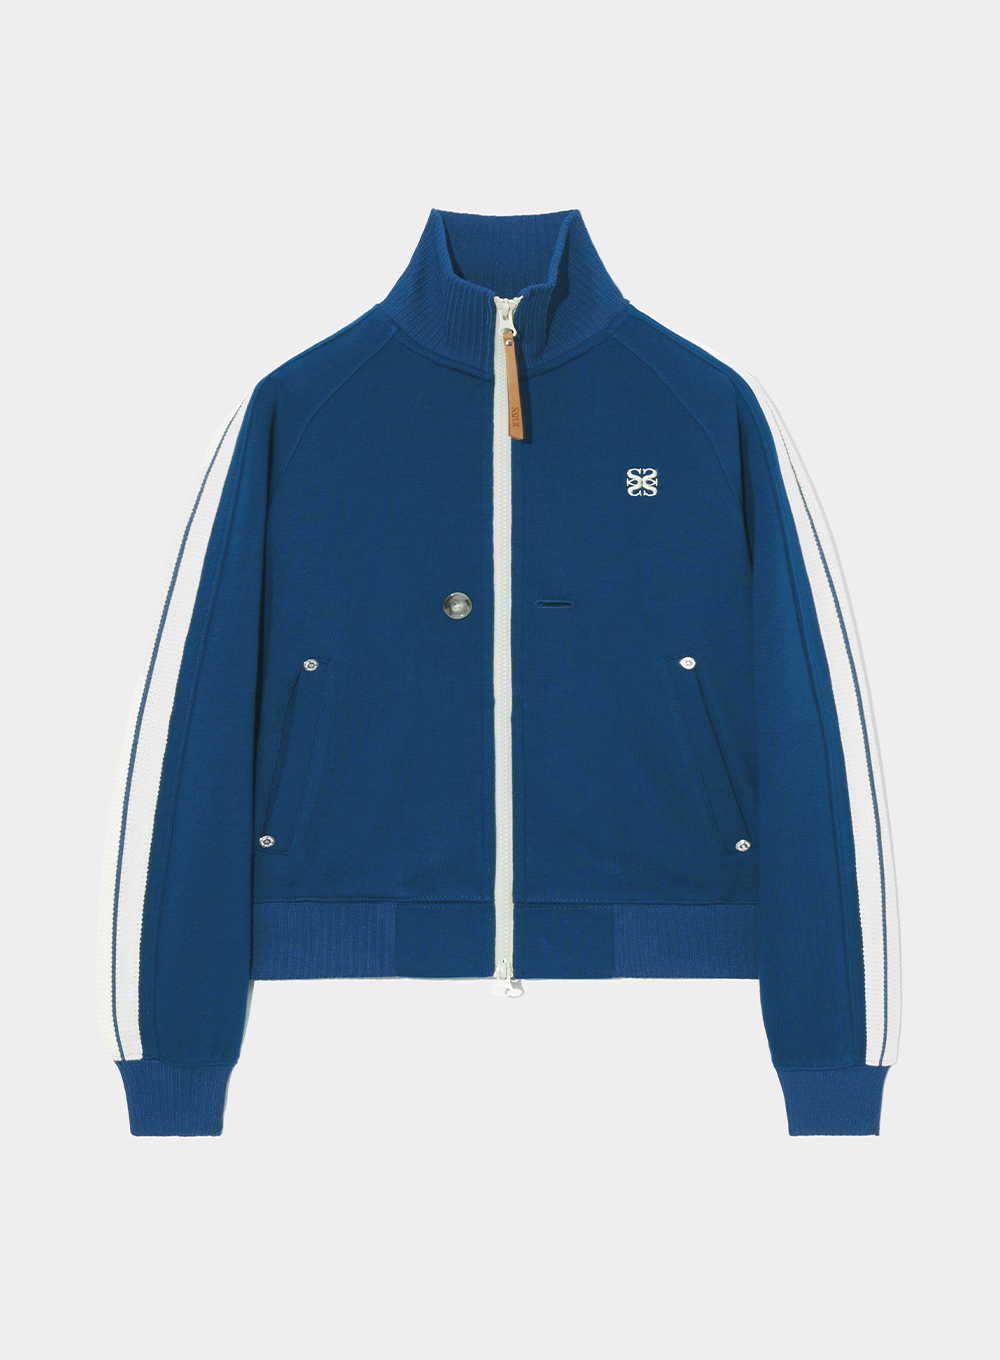 (W) Lawton All Day Track Zip-Up Jacket - Resort Blue